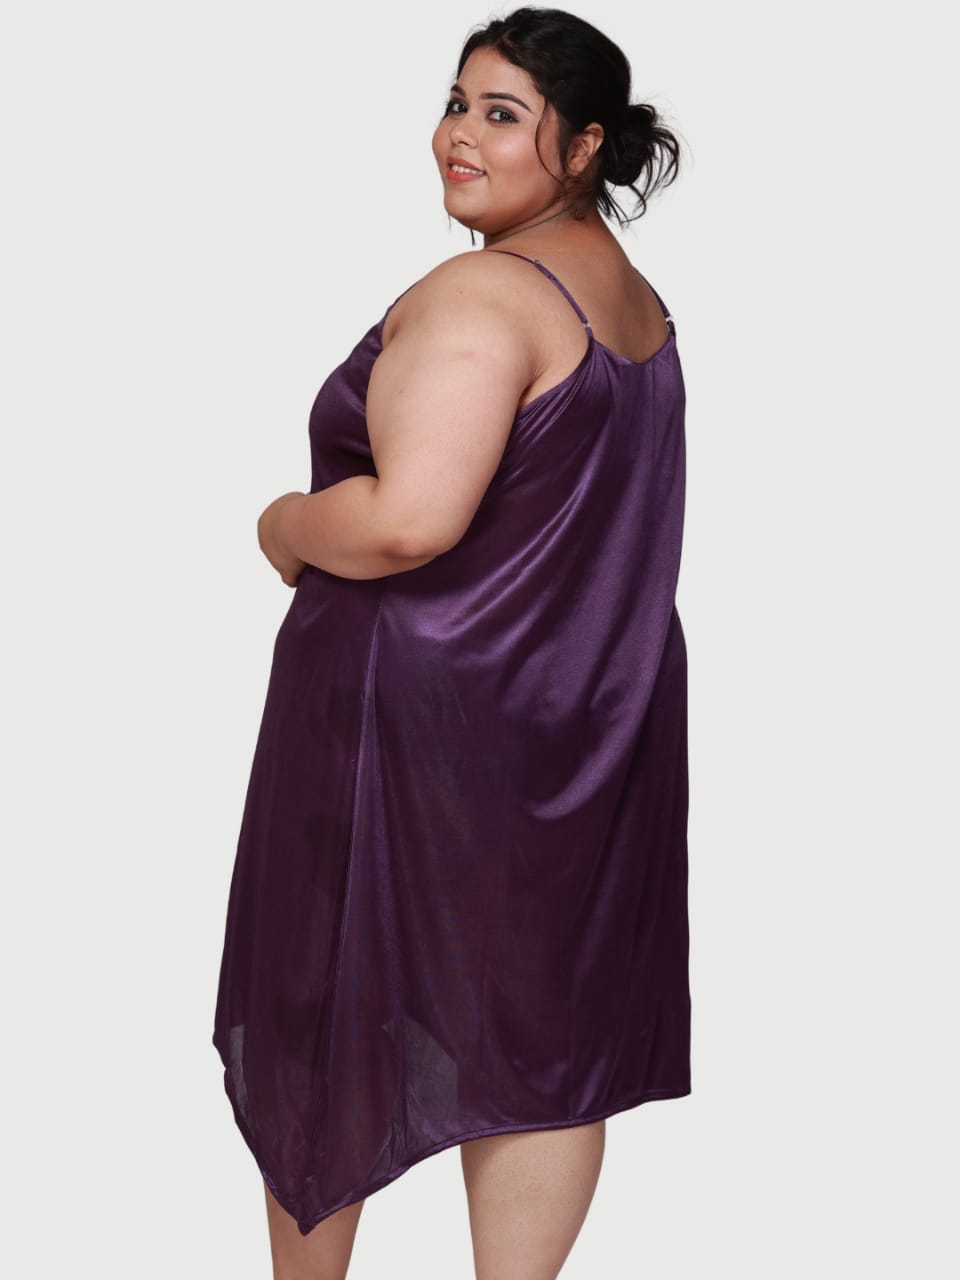 plus size stain slip and babydoll dress for honeymoon in purple color